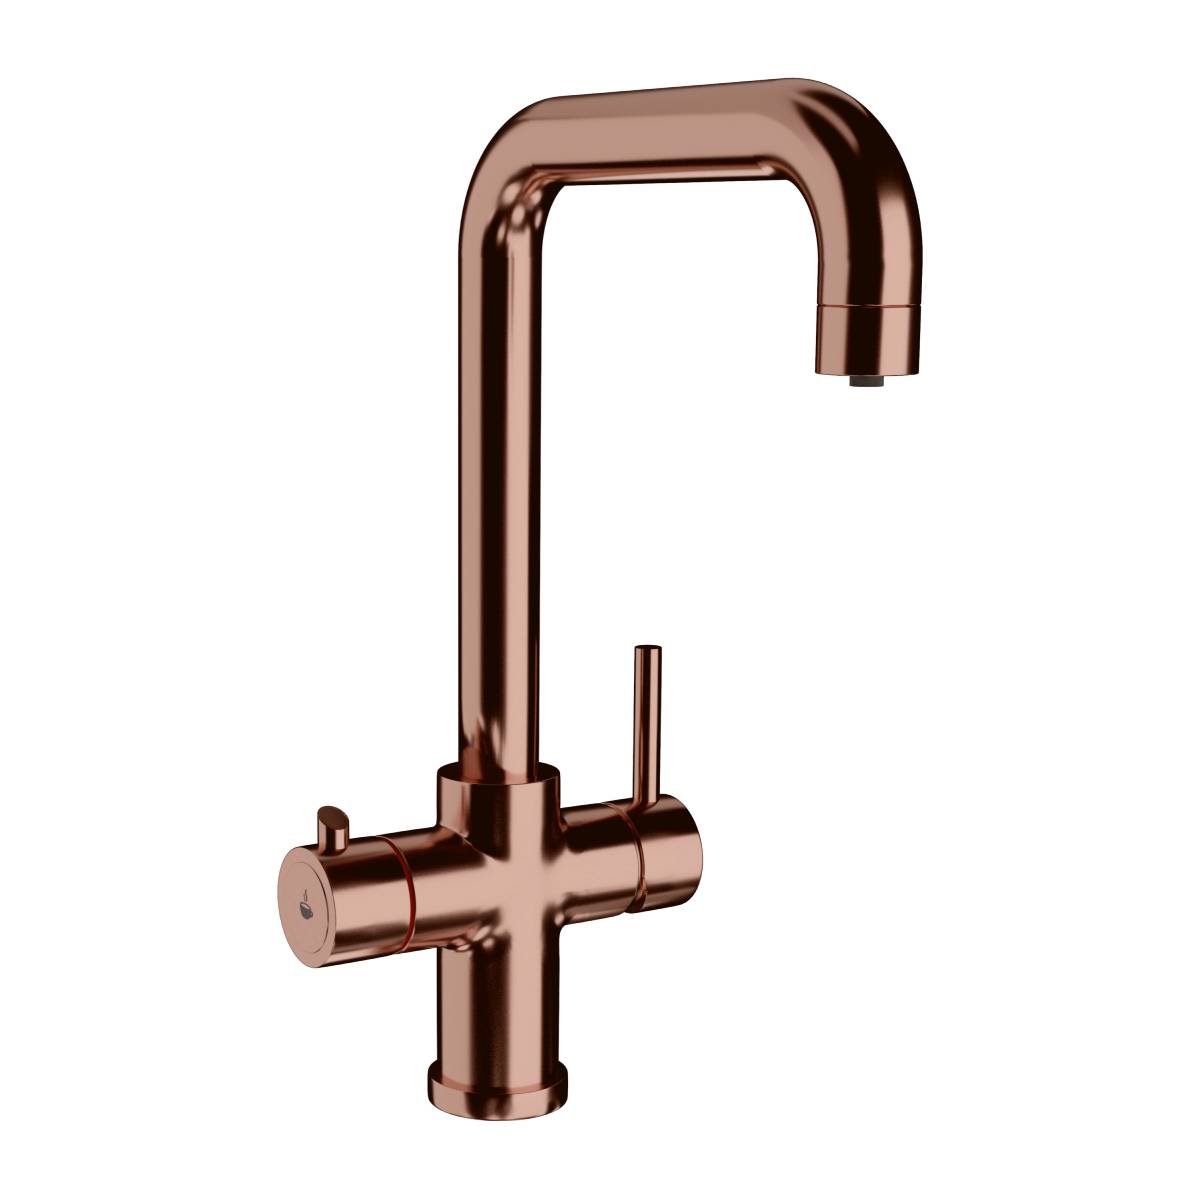 Ellsi 3-in-1 Instant Hot Water Tap with Boiler & Filter - Copper (11676)